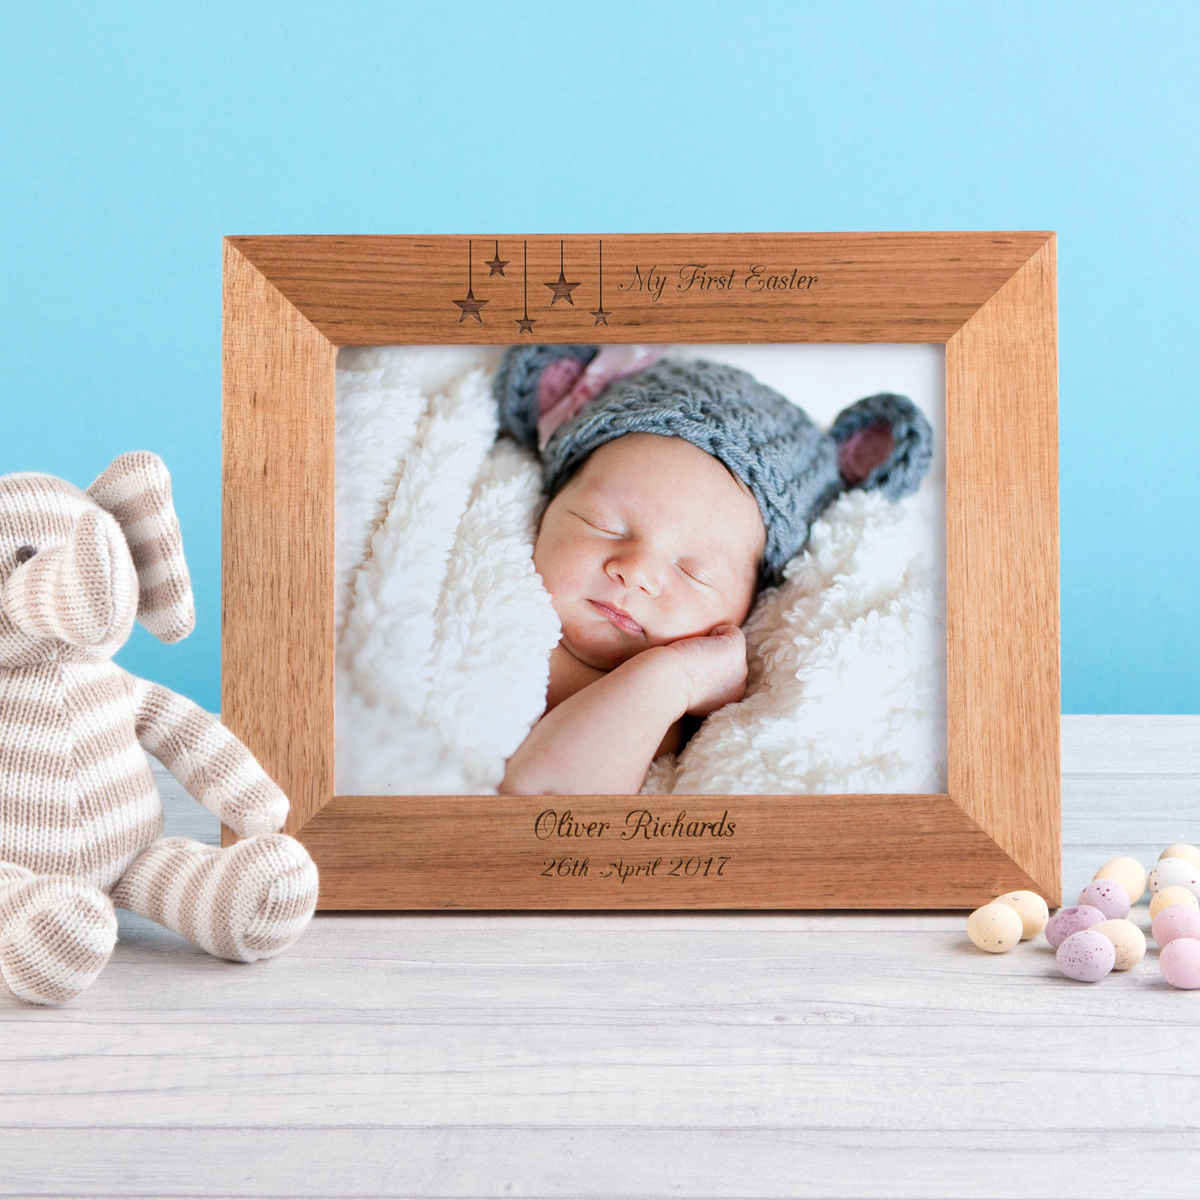 Engraved Wooden Picture Frame - My First Easter